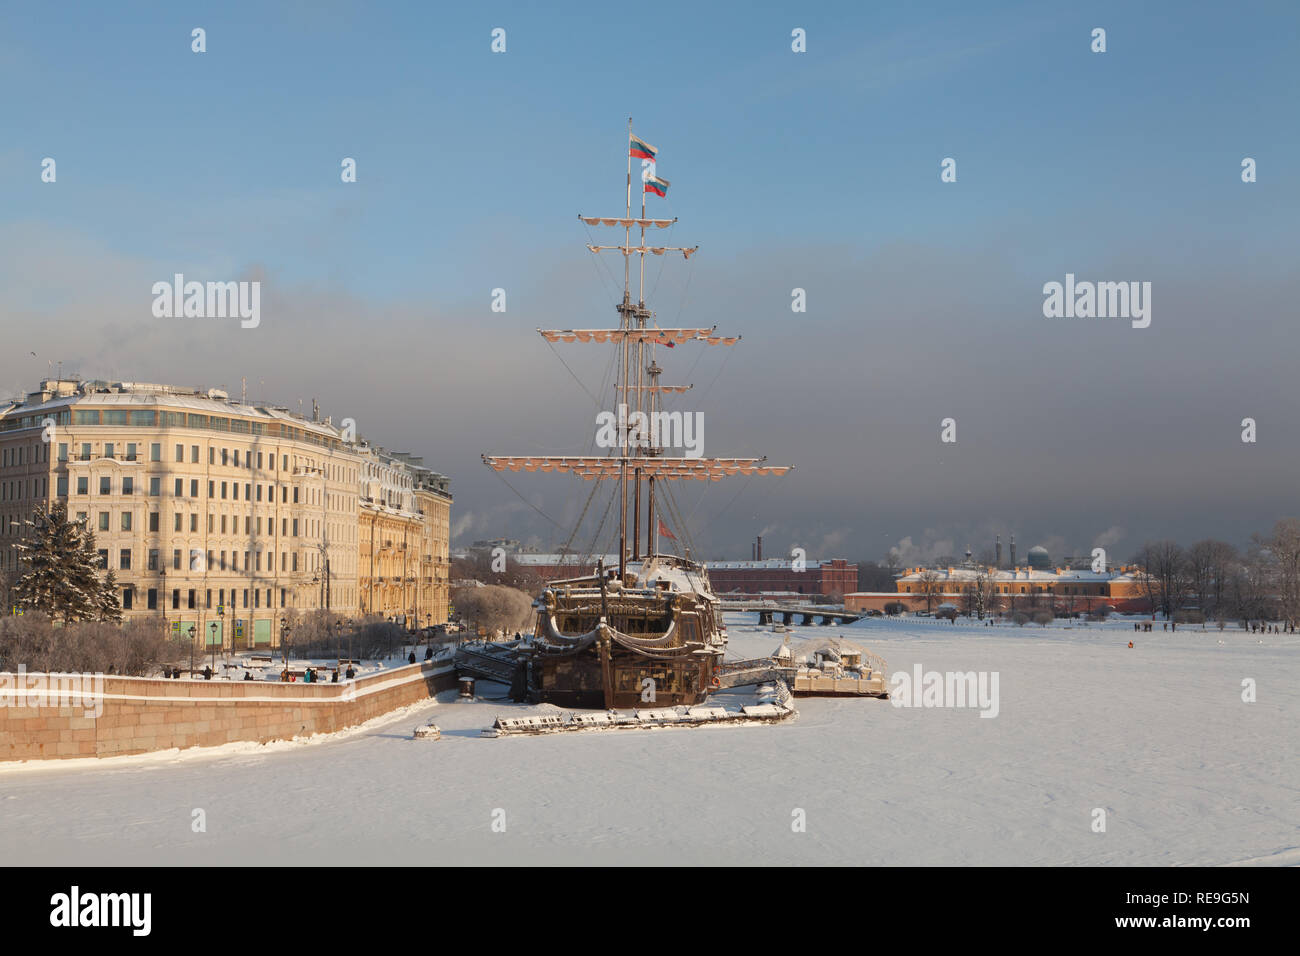 The Flying Dutchman and Neva River, St. Petersburg, Russia. Stock Photo